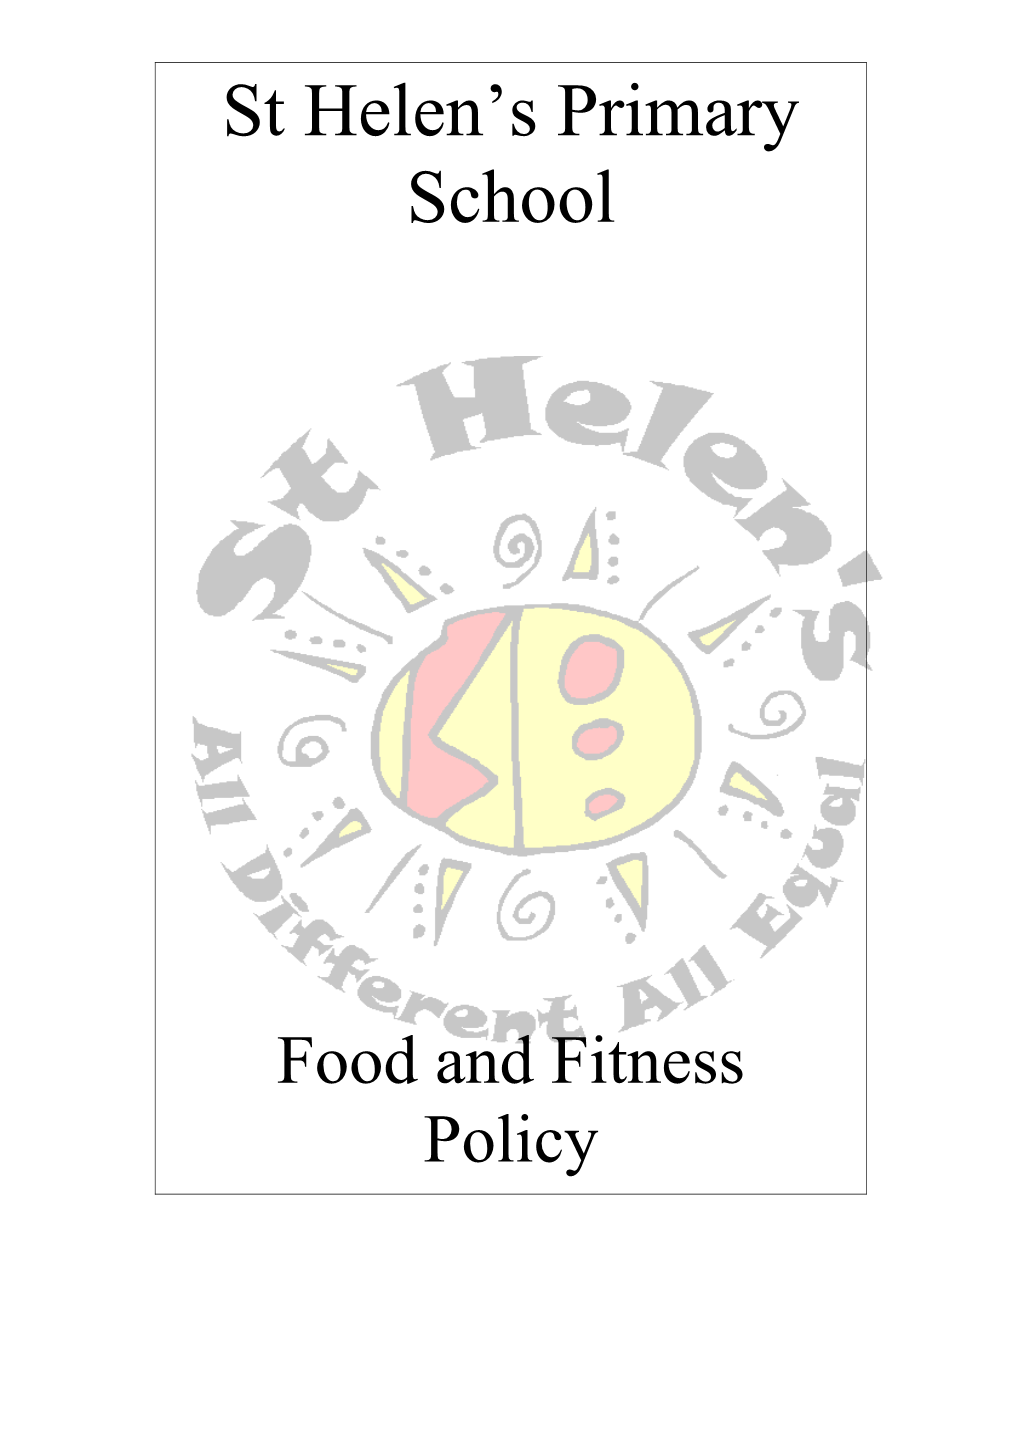 Food and Fitness Policy